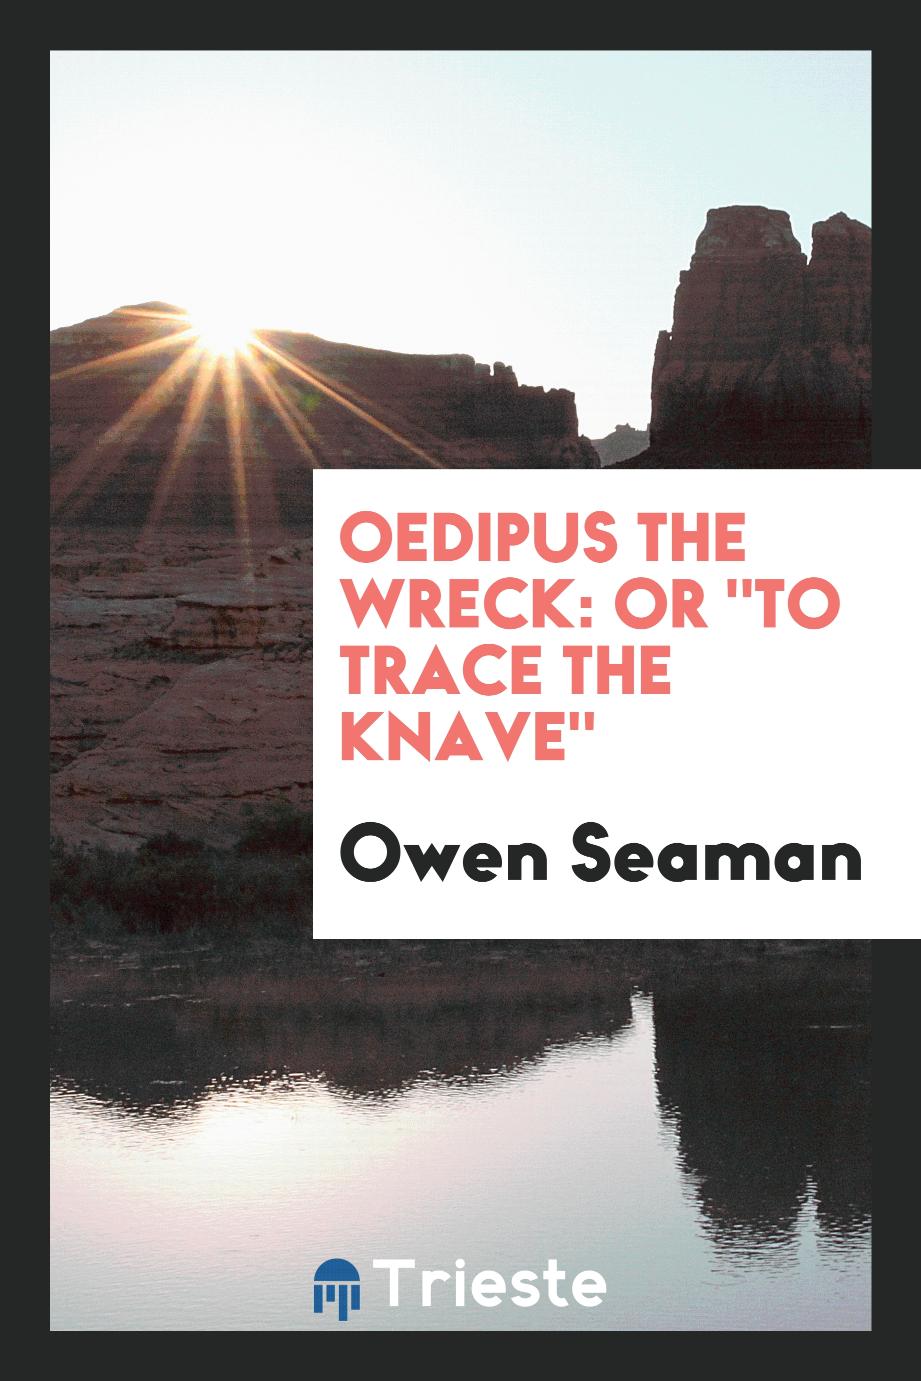 Oedipus the Wreck: Or "To Trace the Knave"